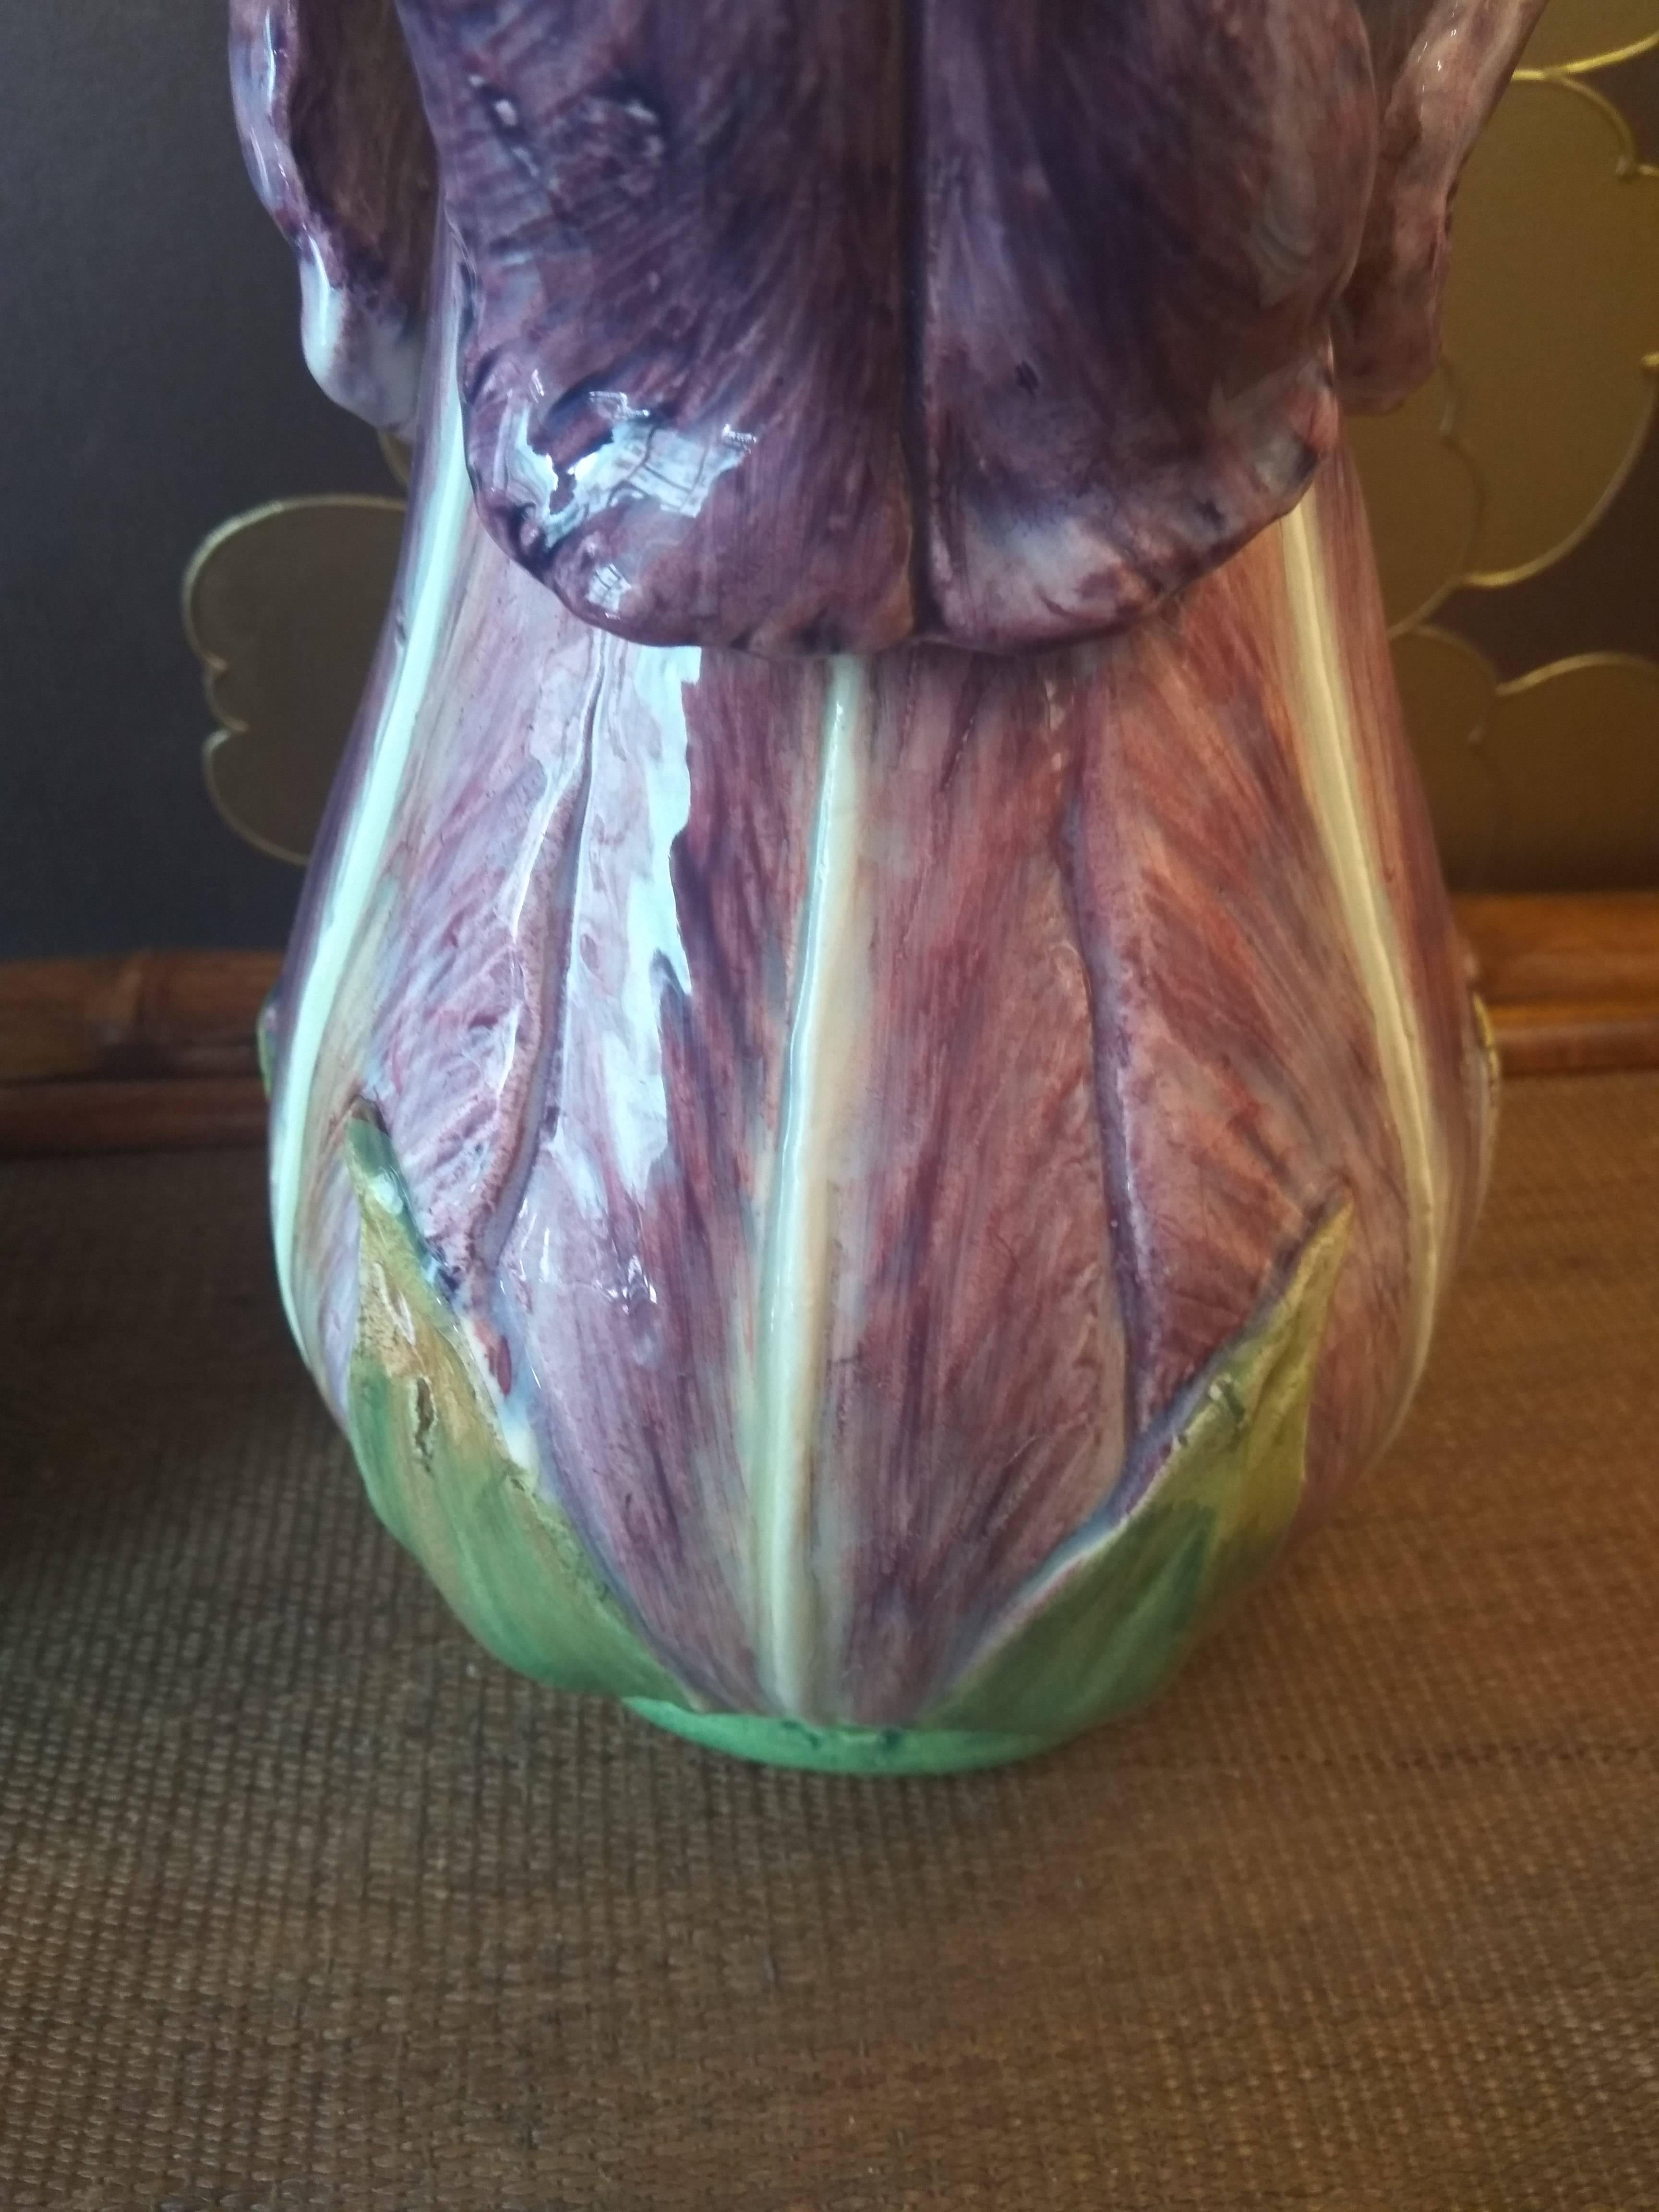 Antique majolica vases by Delphin Massier from Vallauris.
The vases presenting a vegetal decor. 